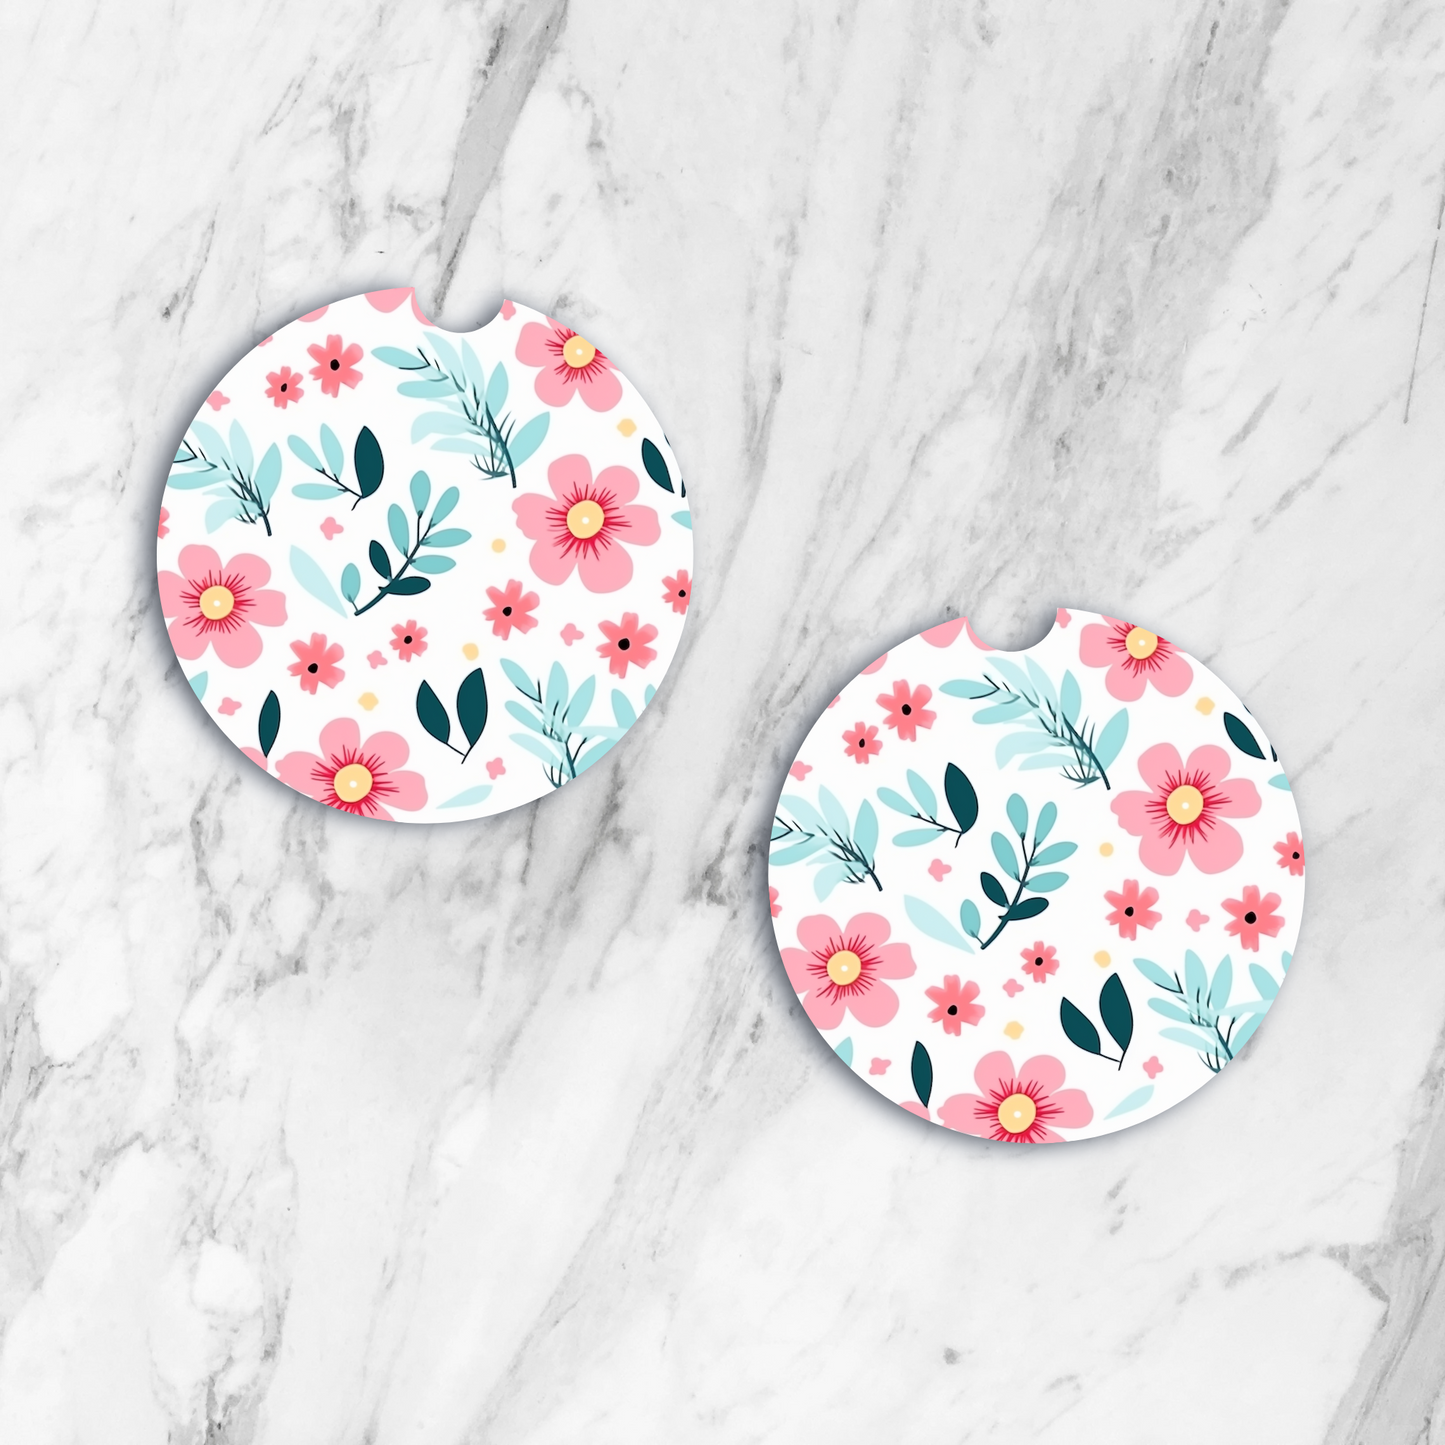 Pink Flowers With Yellow Centers Car Coaster